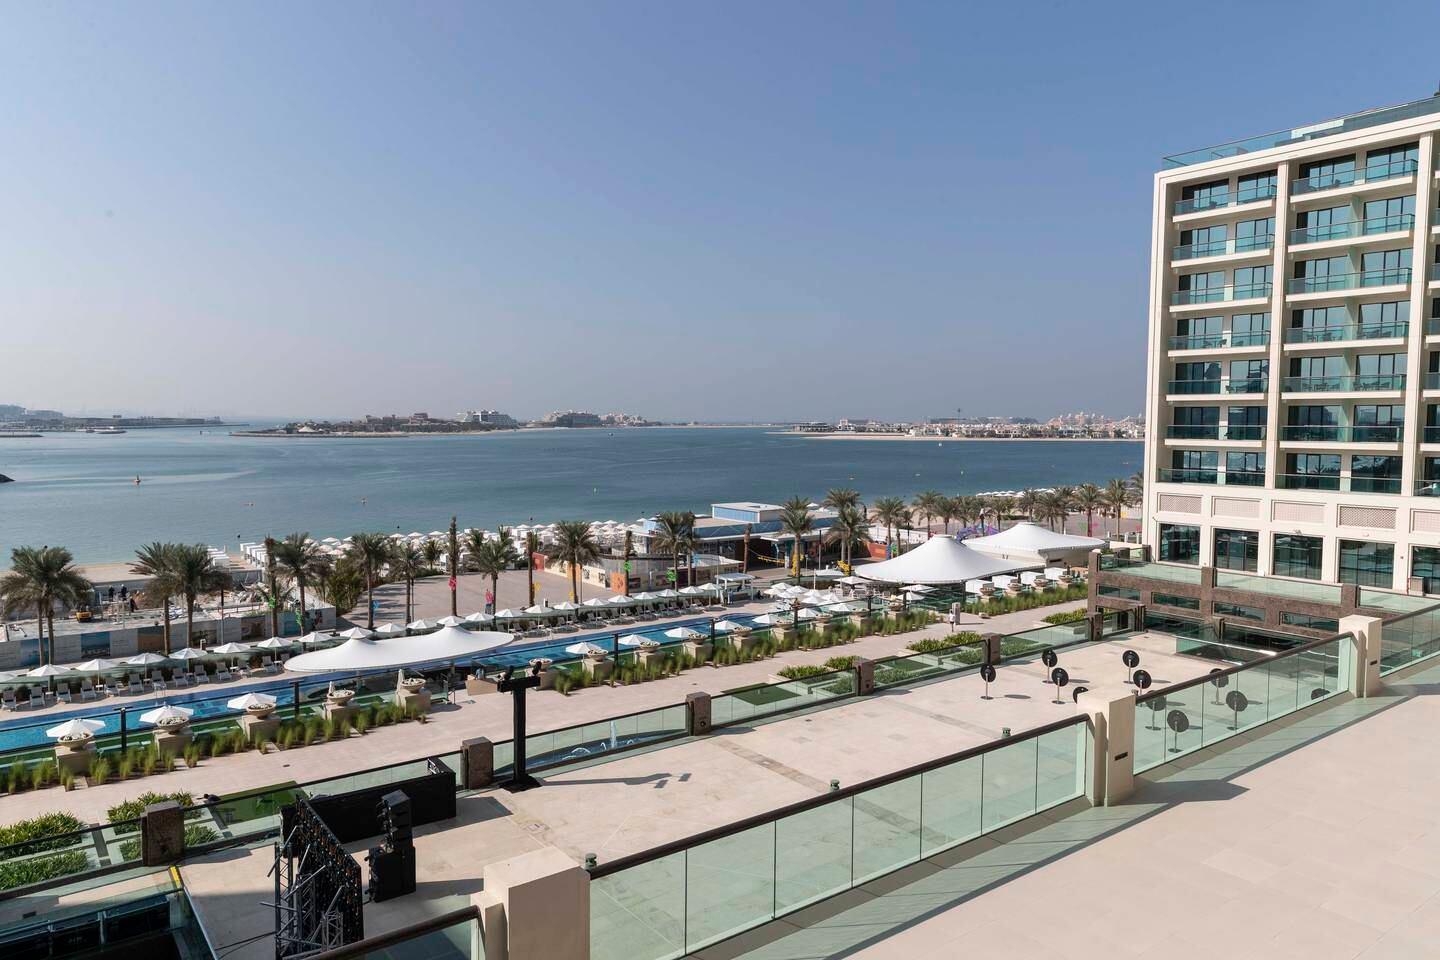 All rooms have private balconies and views of the Arabian Gulf. Antonie Robertson / The National


